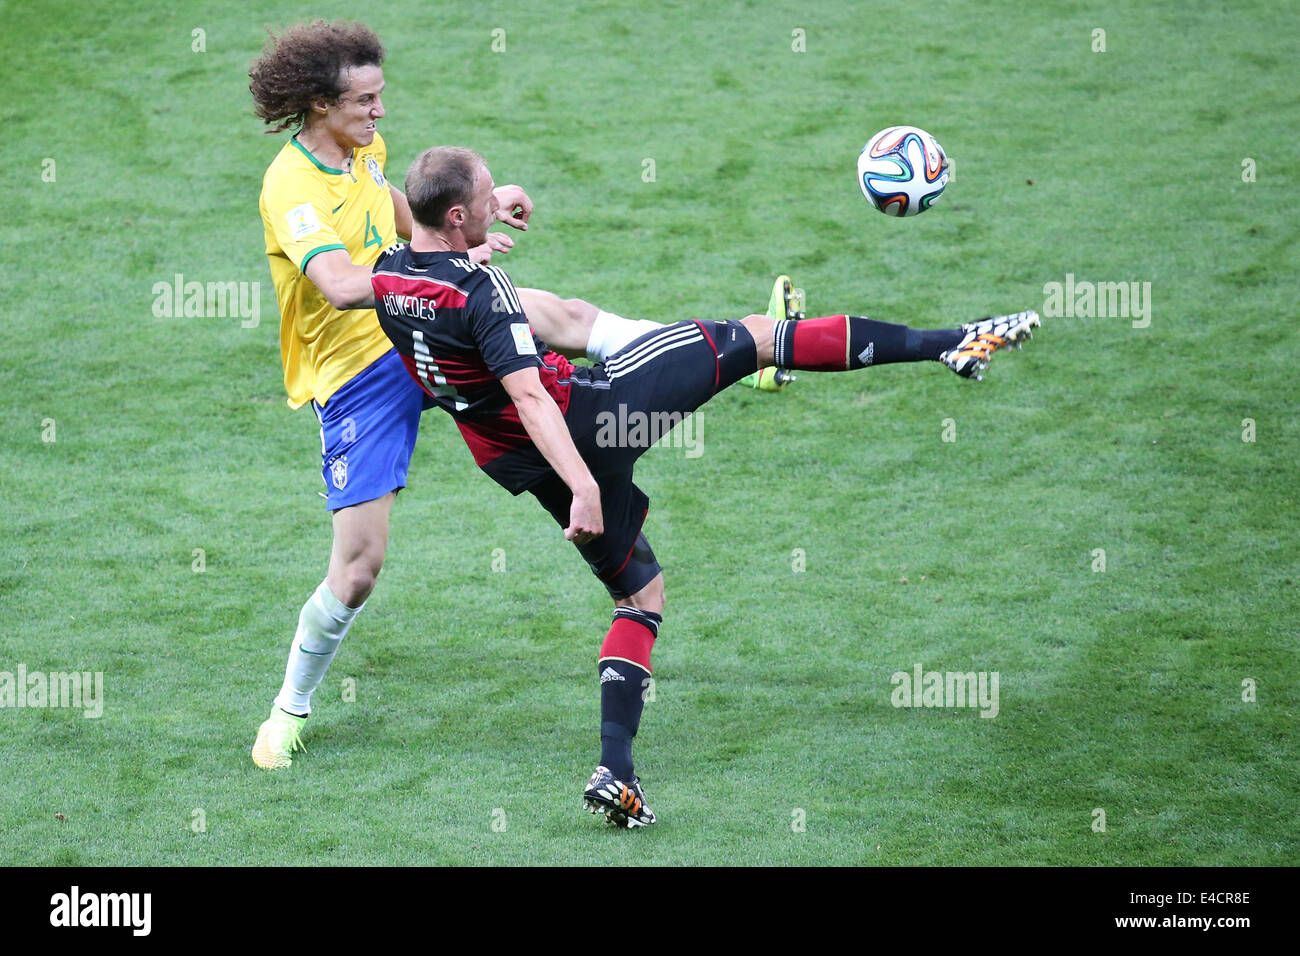 Belo Horizonte, Brazil. 8th July, 2014. Brazil's David Luiz vies with Germany's Benedikt Howedes during a semifinal match between Brazil and Germany of 2014 FIFA World Cup at the Estadio Mineirao Stadium in Belo Horizonte, Brazil, on July 8, 2014. Credit:  Li Ming/Xinhua/Alamy Live News Stock Photo